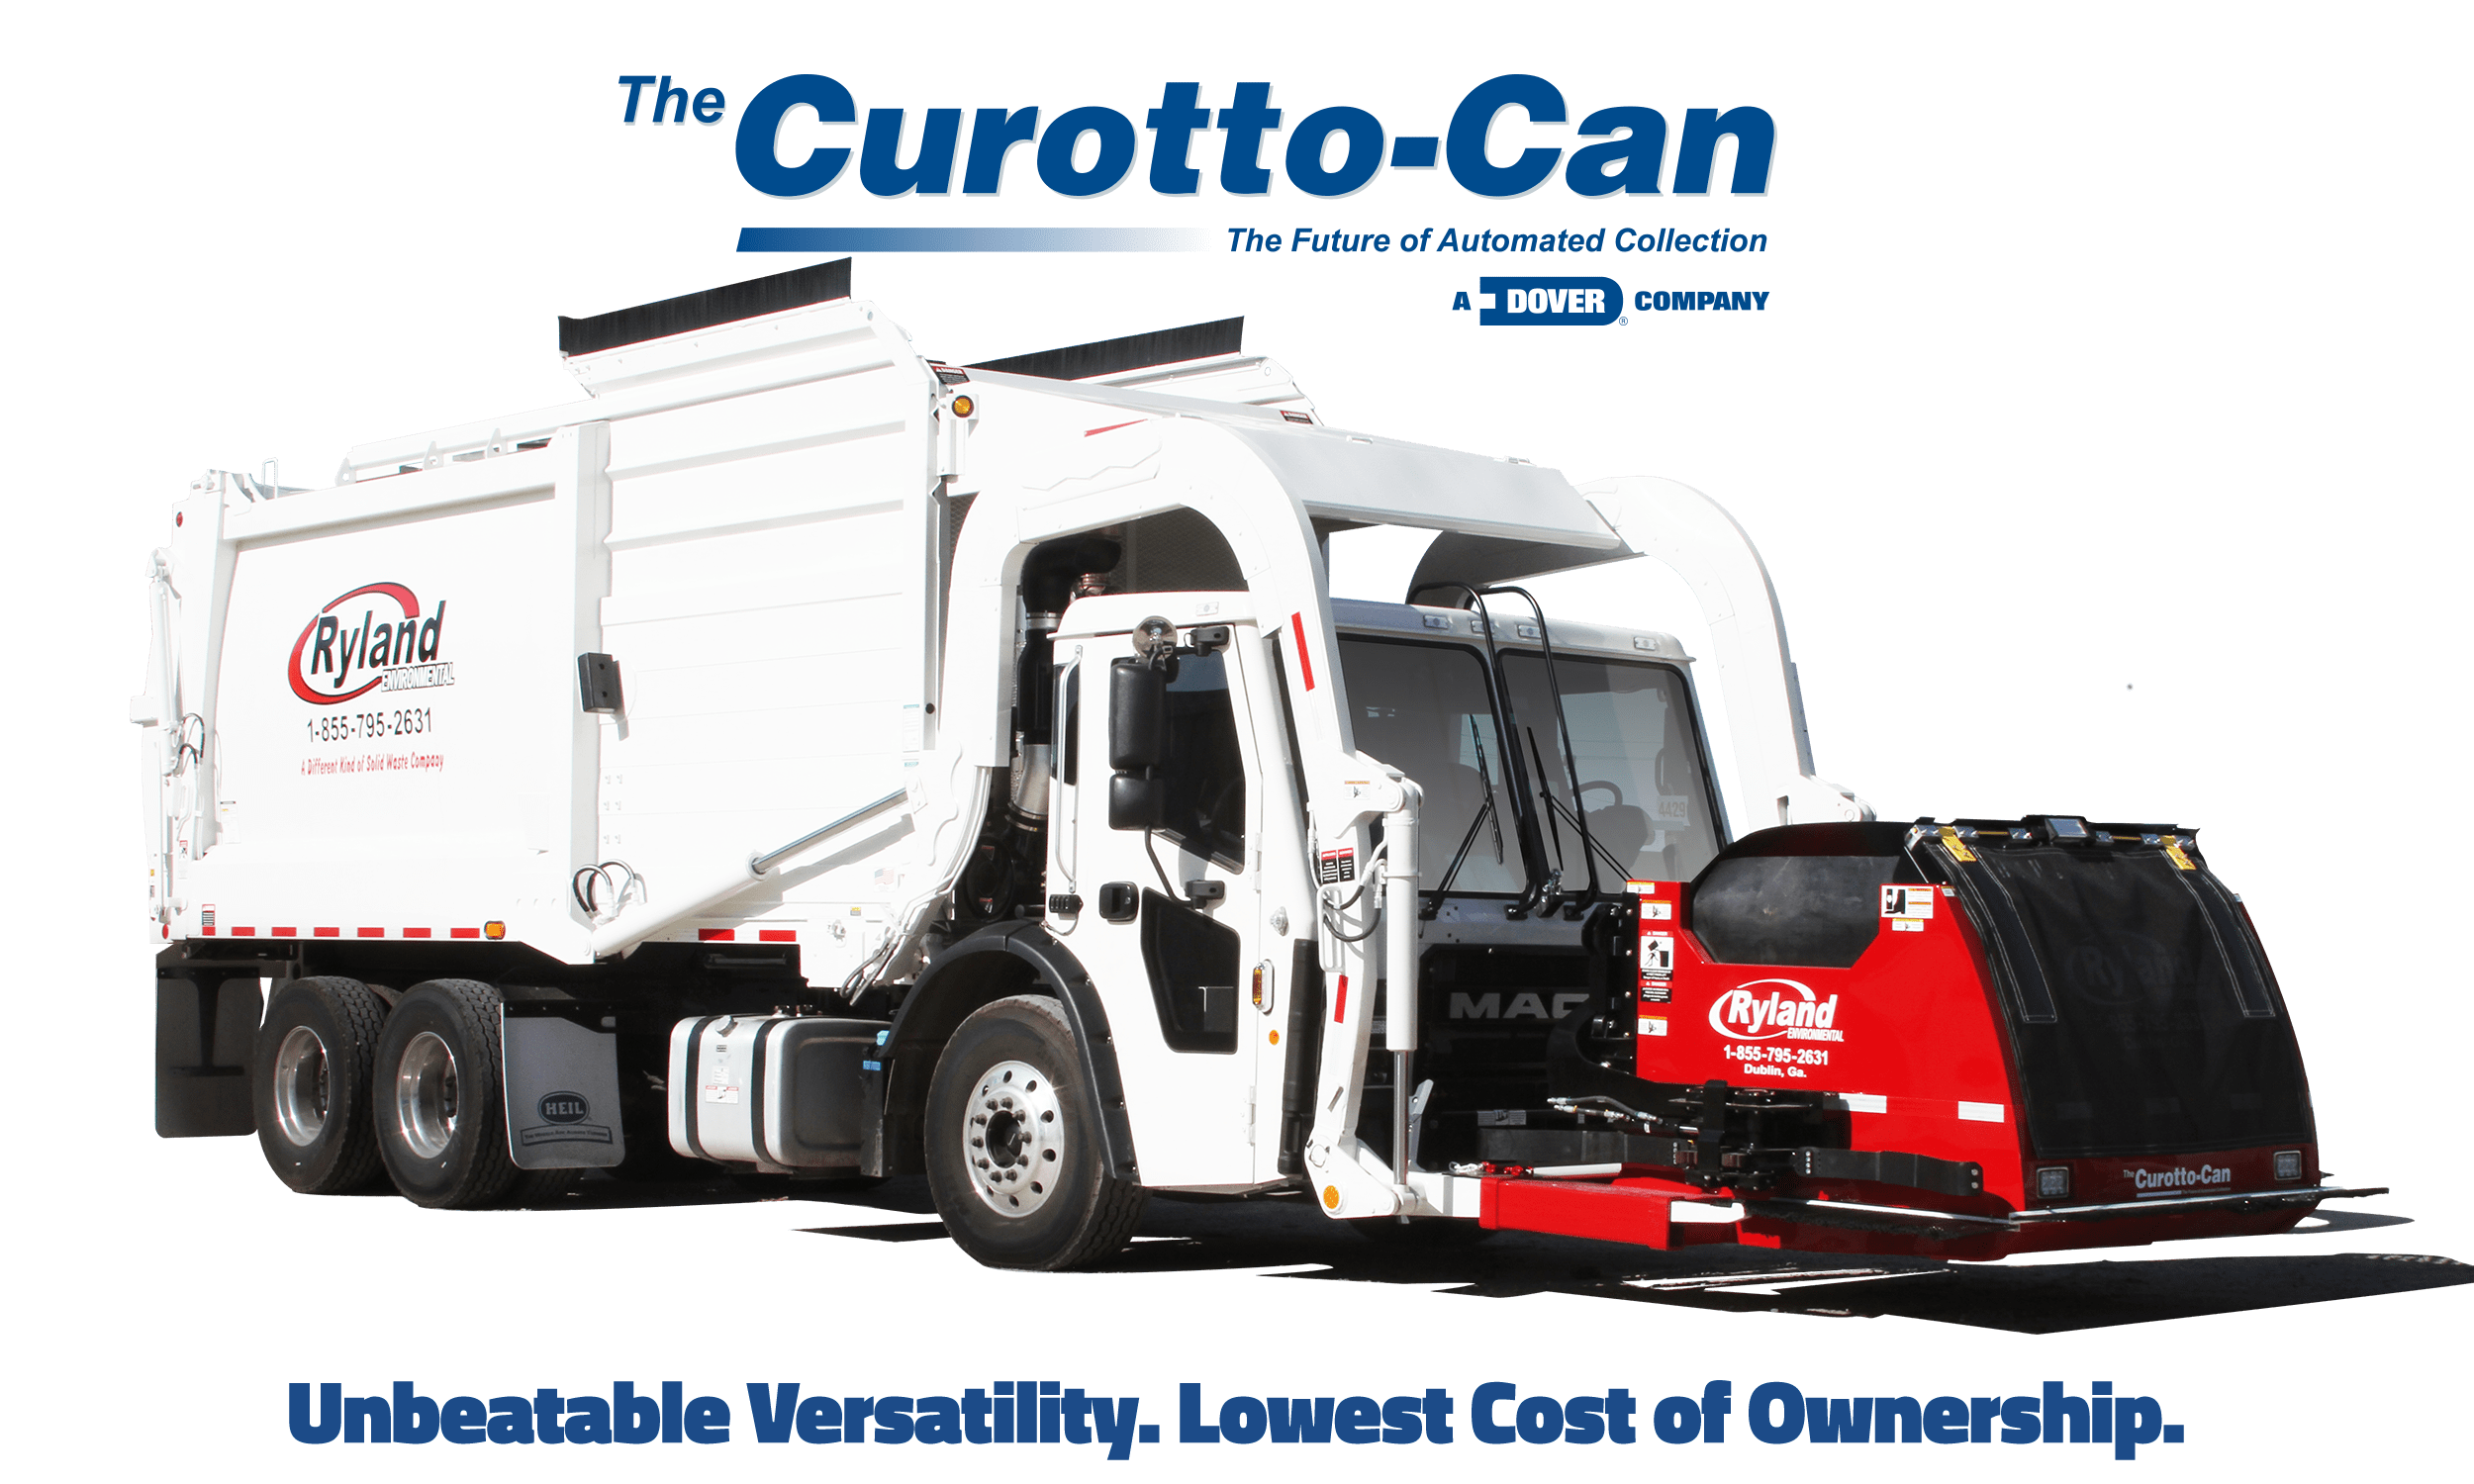 Curotto Commercial Gripper For Commercial Front Load Garbage Trucks